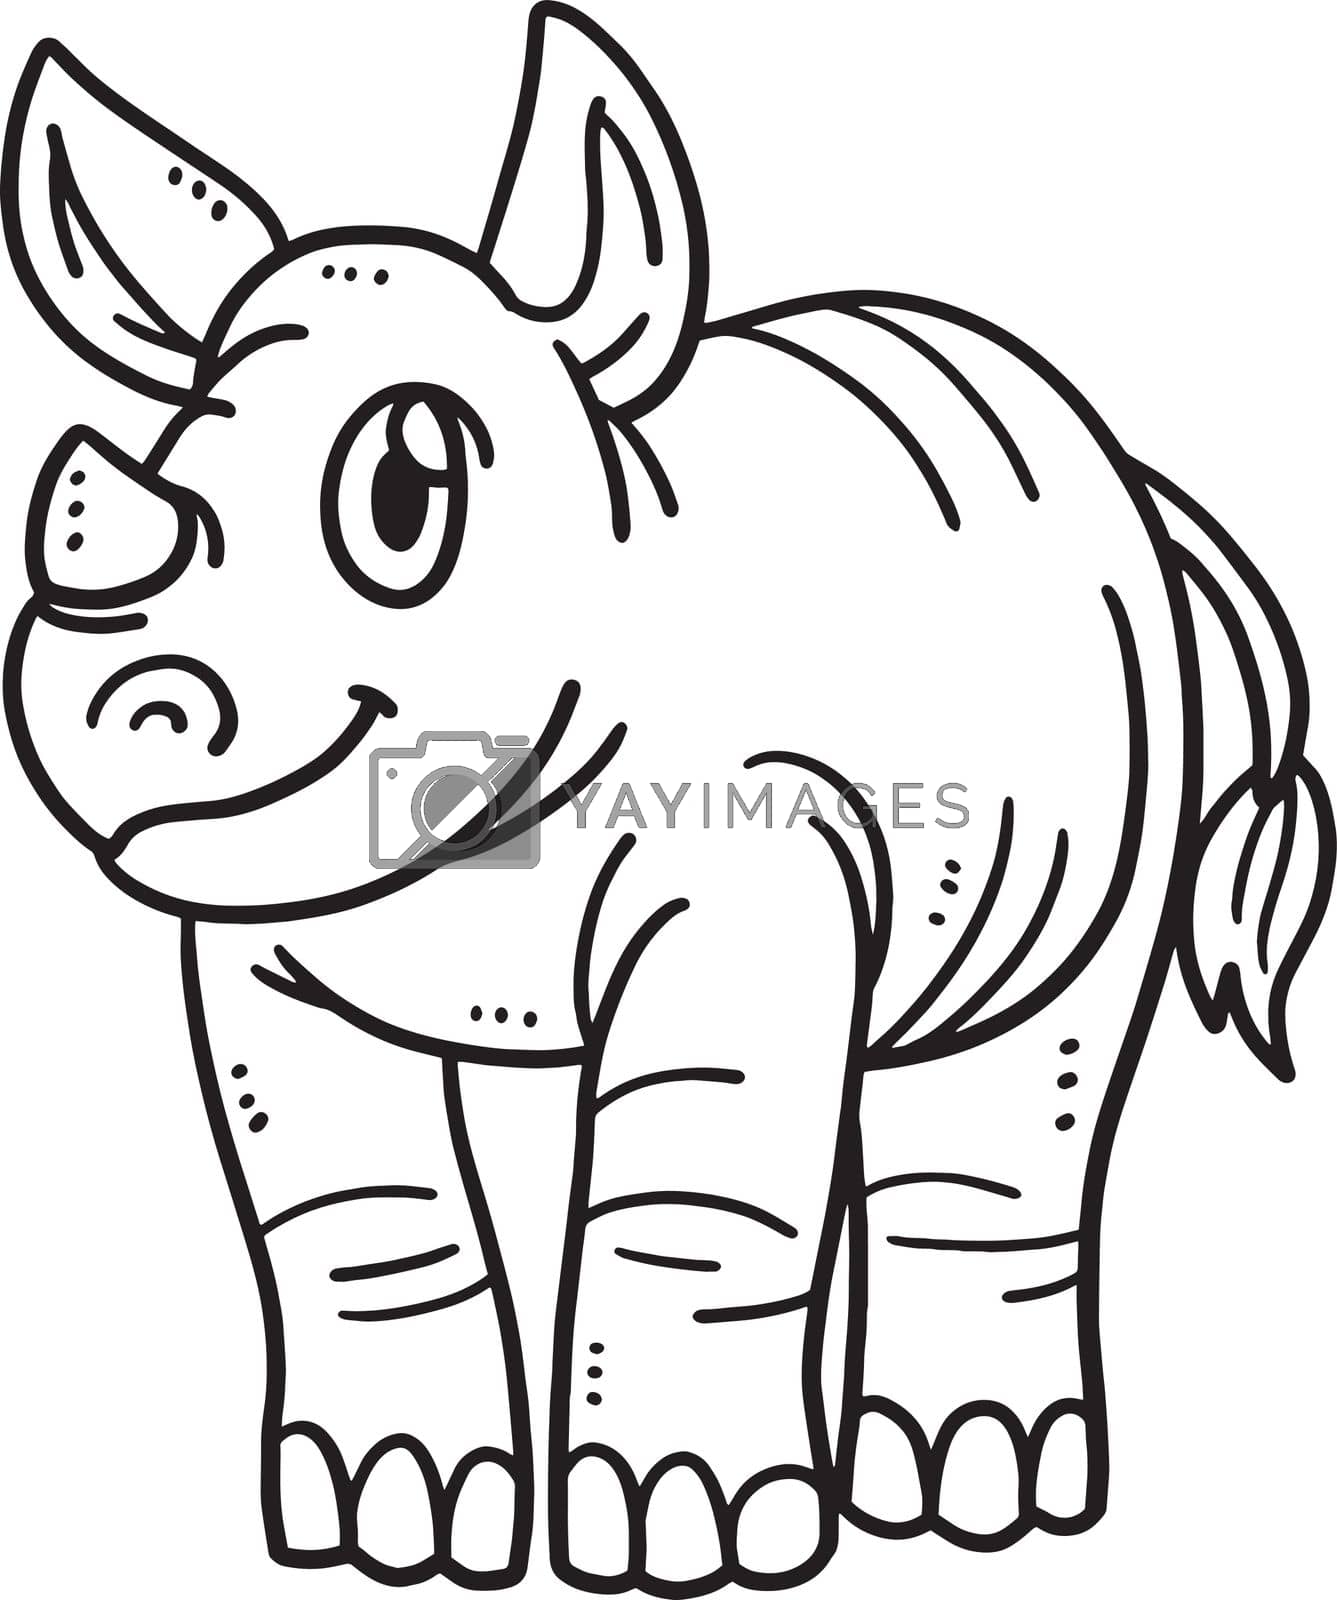 Royalty free image of Baby Rhino Isolated Coloring Page for Kids by abbydesign